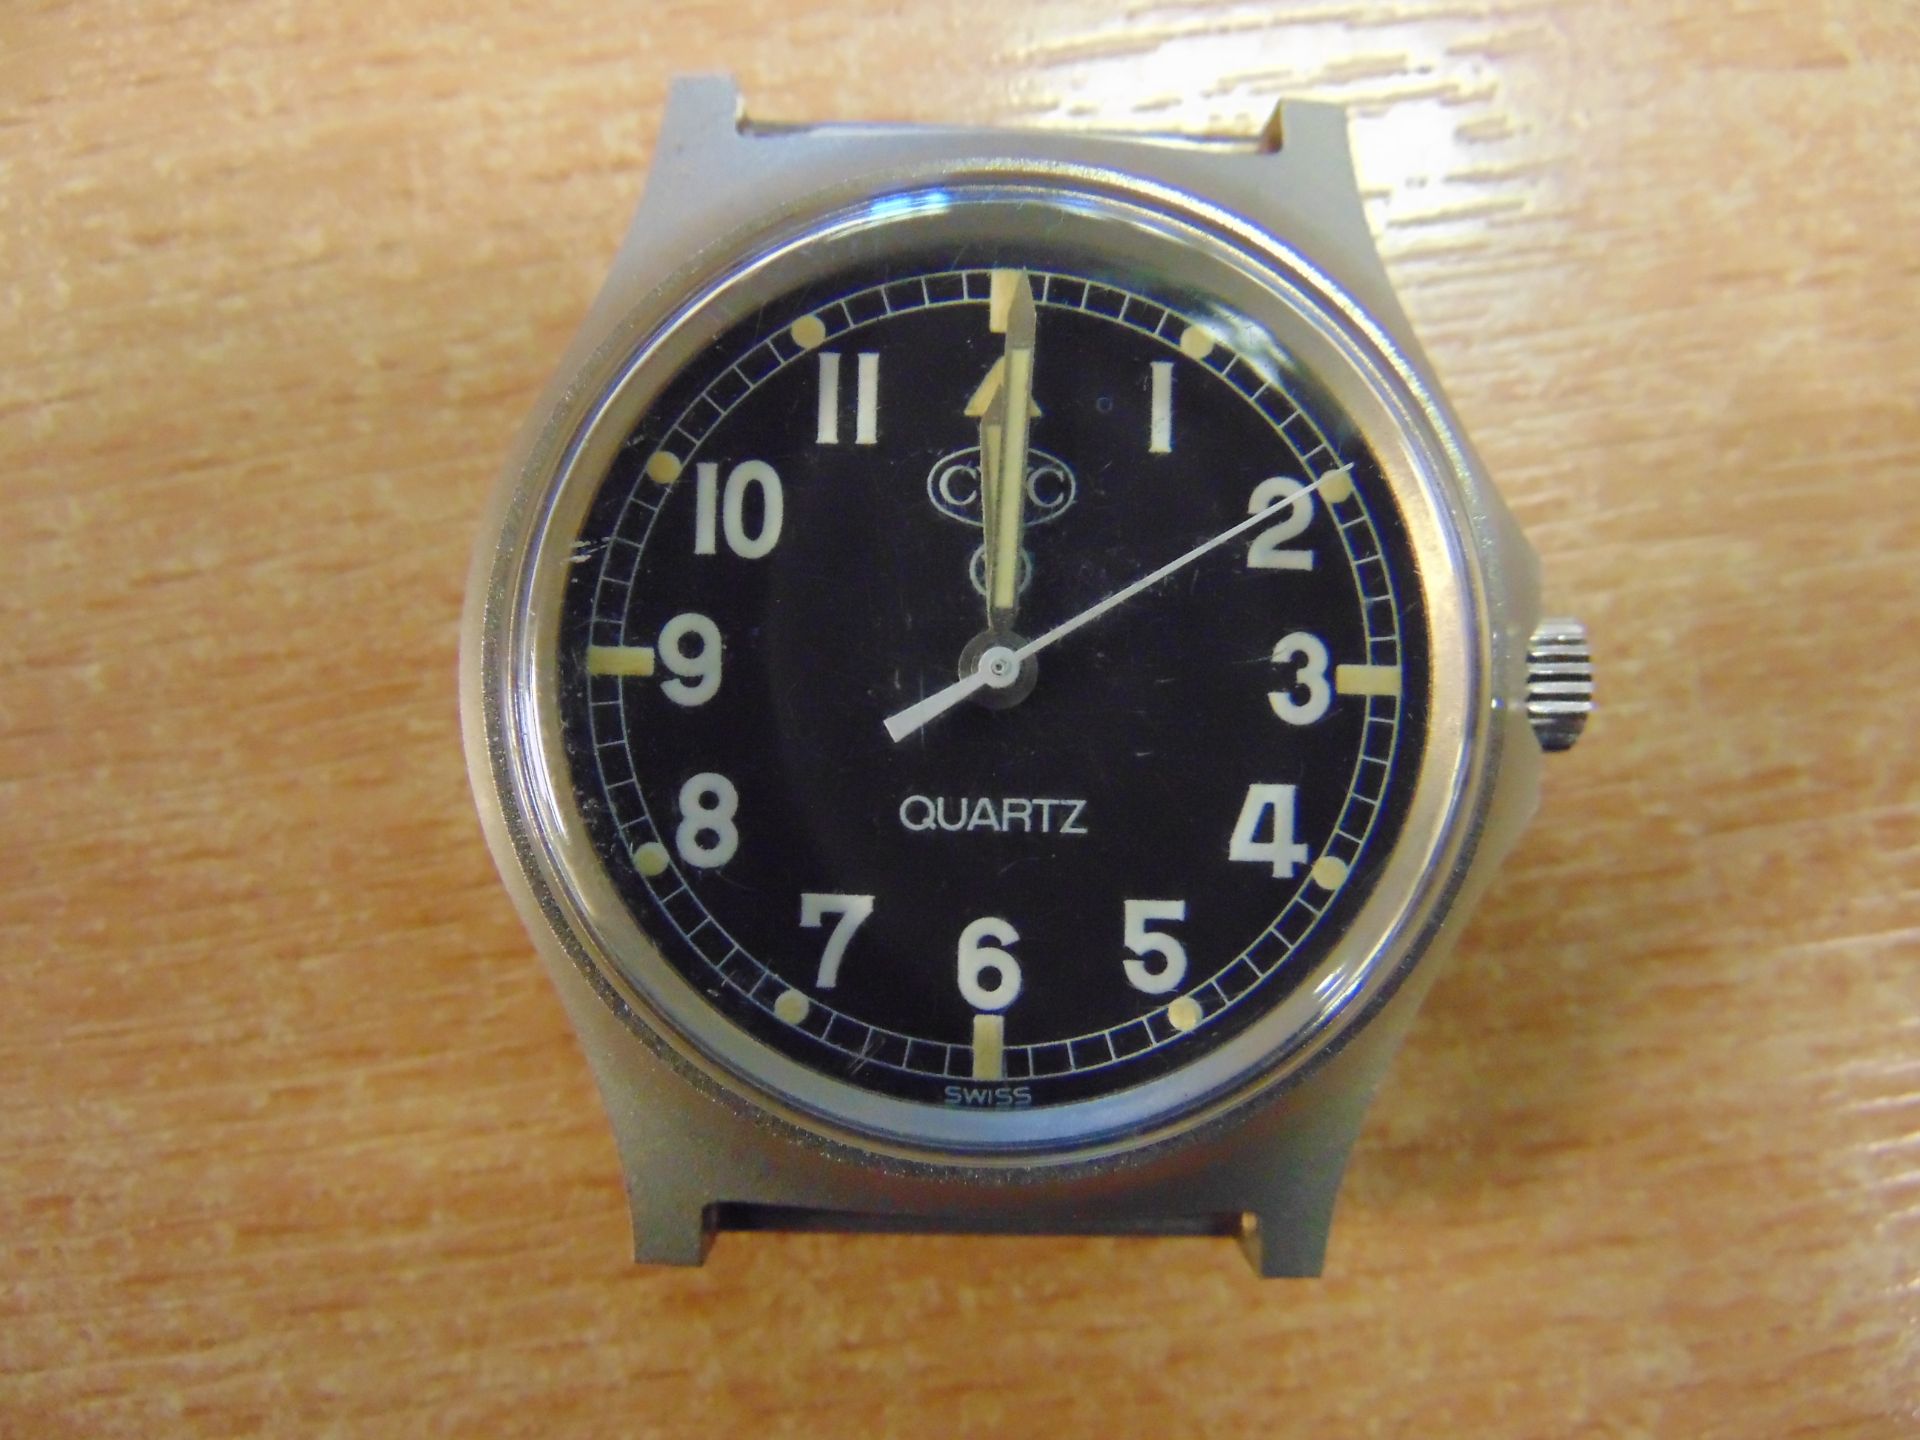 VERY RARE UNISSUED CWC W10 FAT BOY SERVICE WATCH NATO MARKED DATED 1982 - FALKLANDS WAR - Image 3 of 10